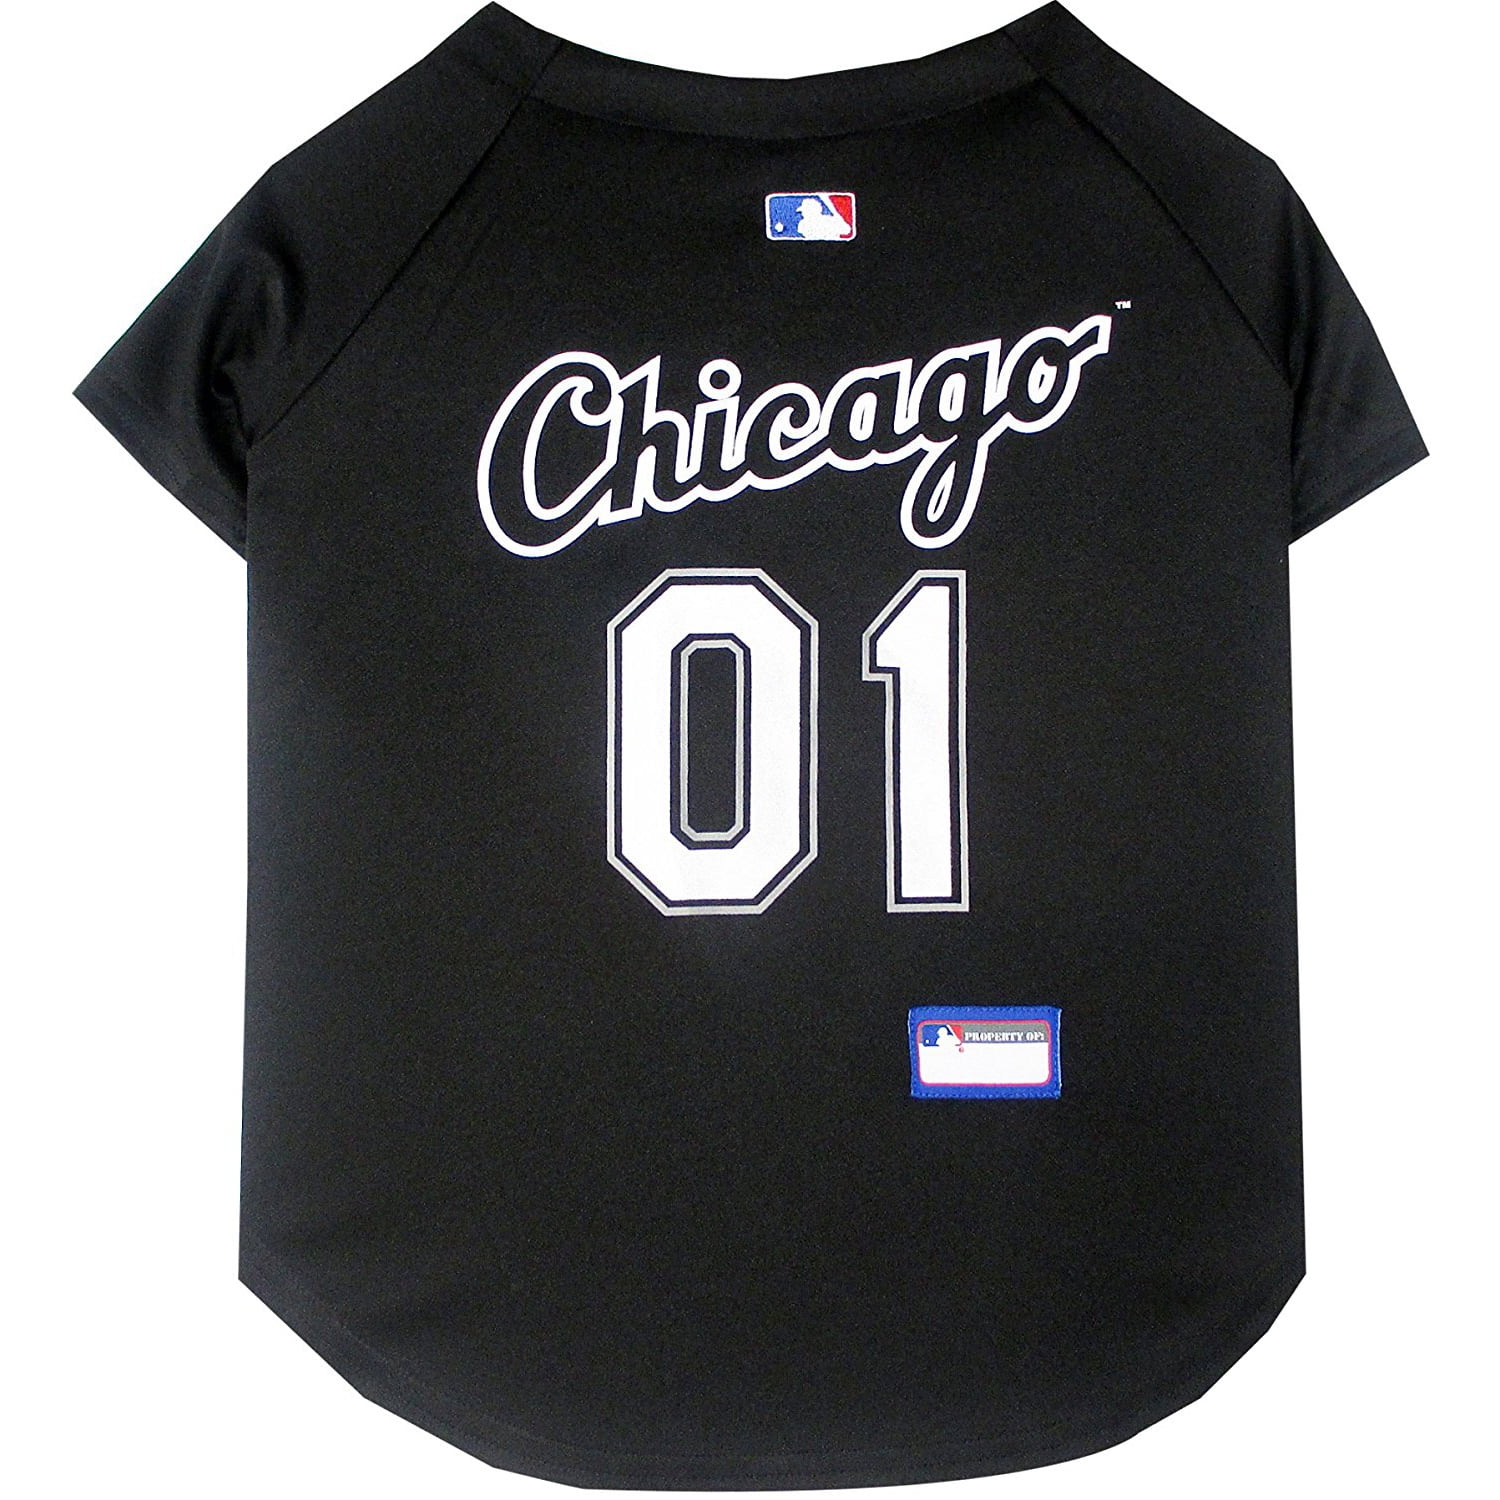 Pets First MLB Chicago White Sox Mesh Jersey for Dogs and Cats - Licensed  Soft Poly-Cotton Sports Jersey - Medium 